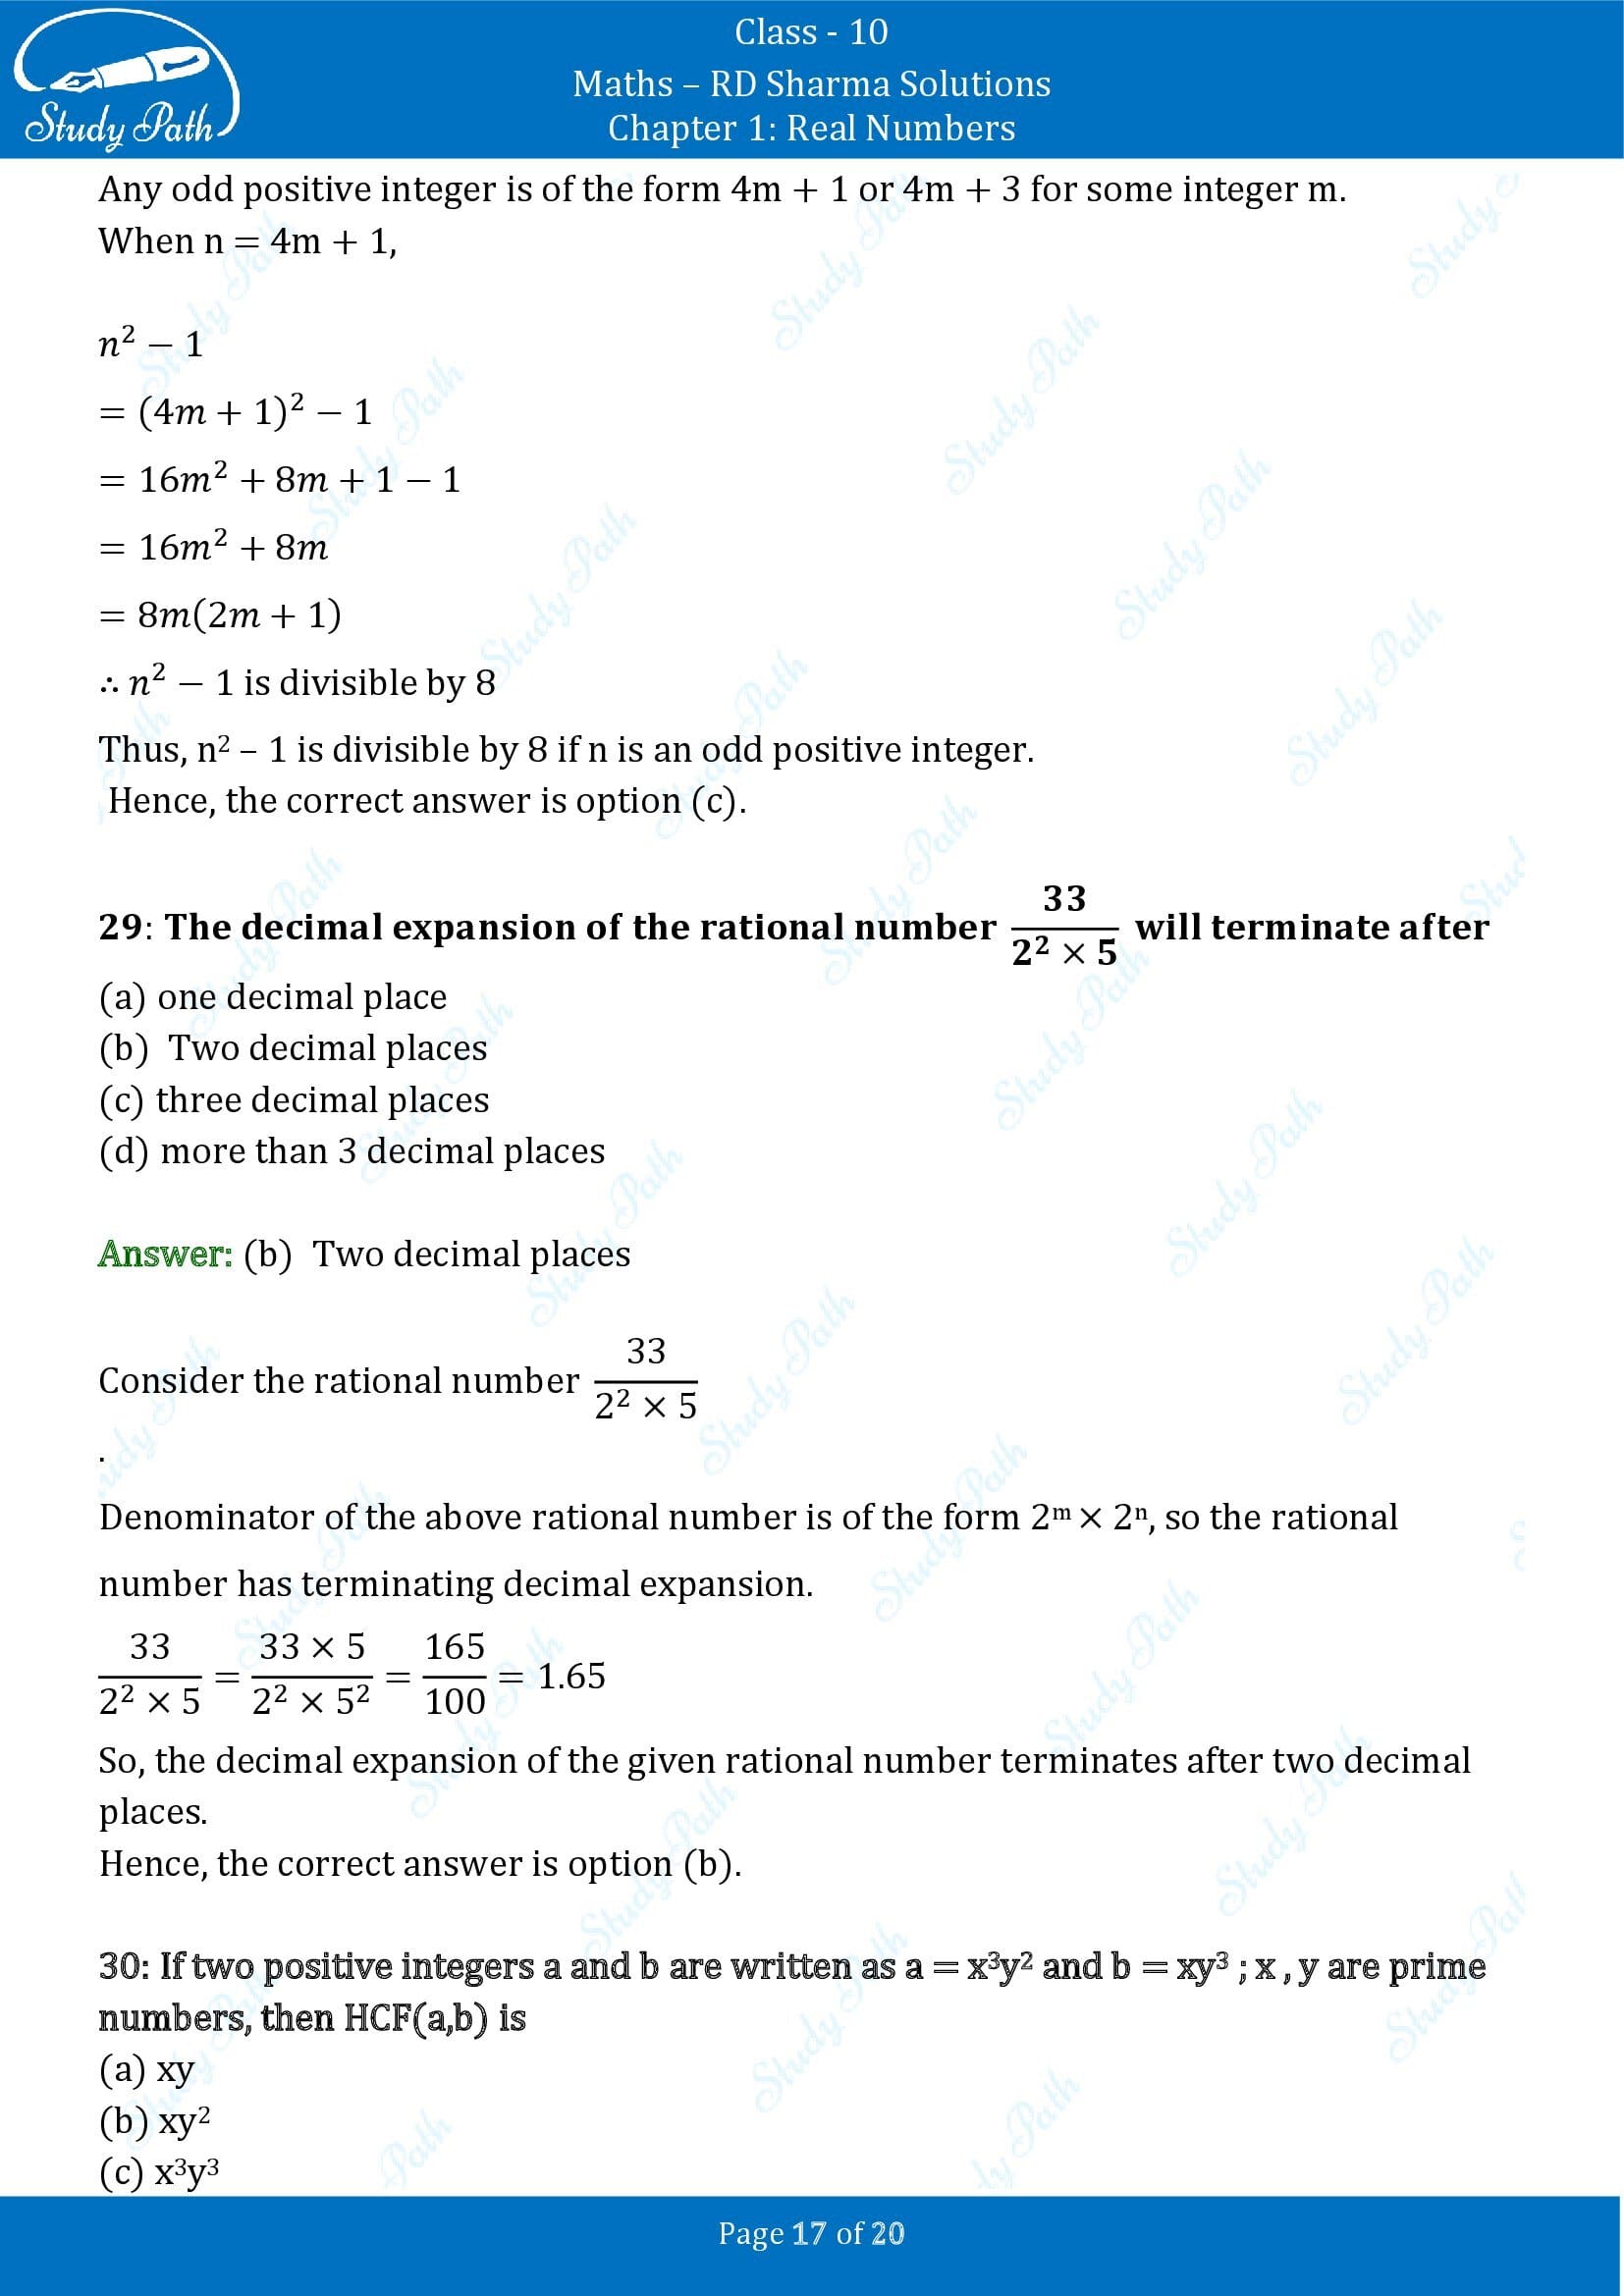 RD Sharma Solutions Class 10 Chapter 1 Real Numbers Multiple Choice Questions MCQs 00017